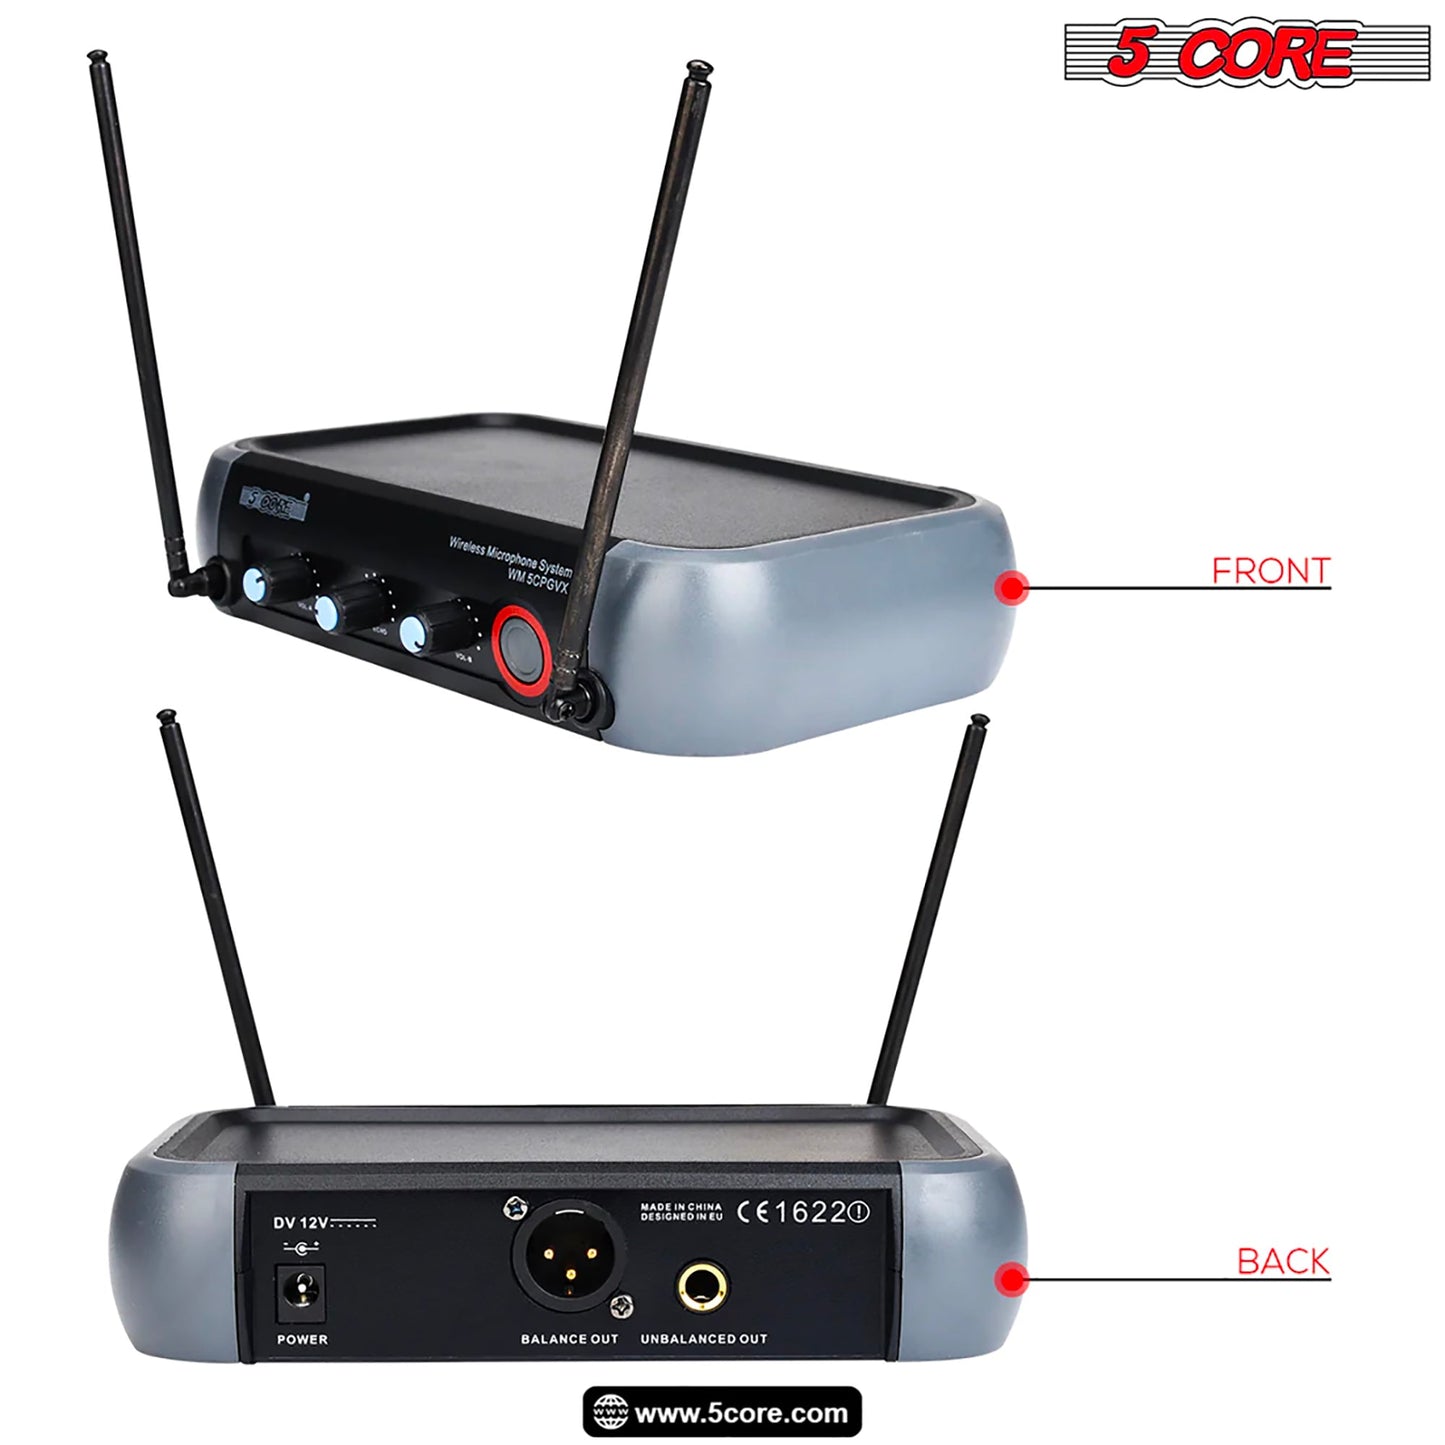 5Core Professional Wireless Microphone System with case, VHF Dual 2 Handheld Mic WM 5CPGVX